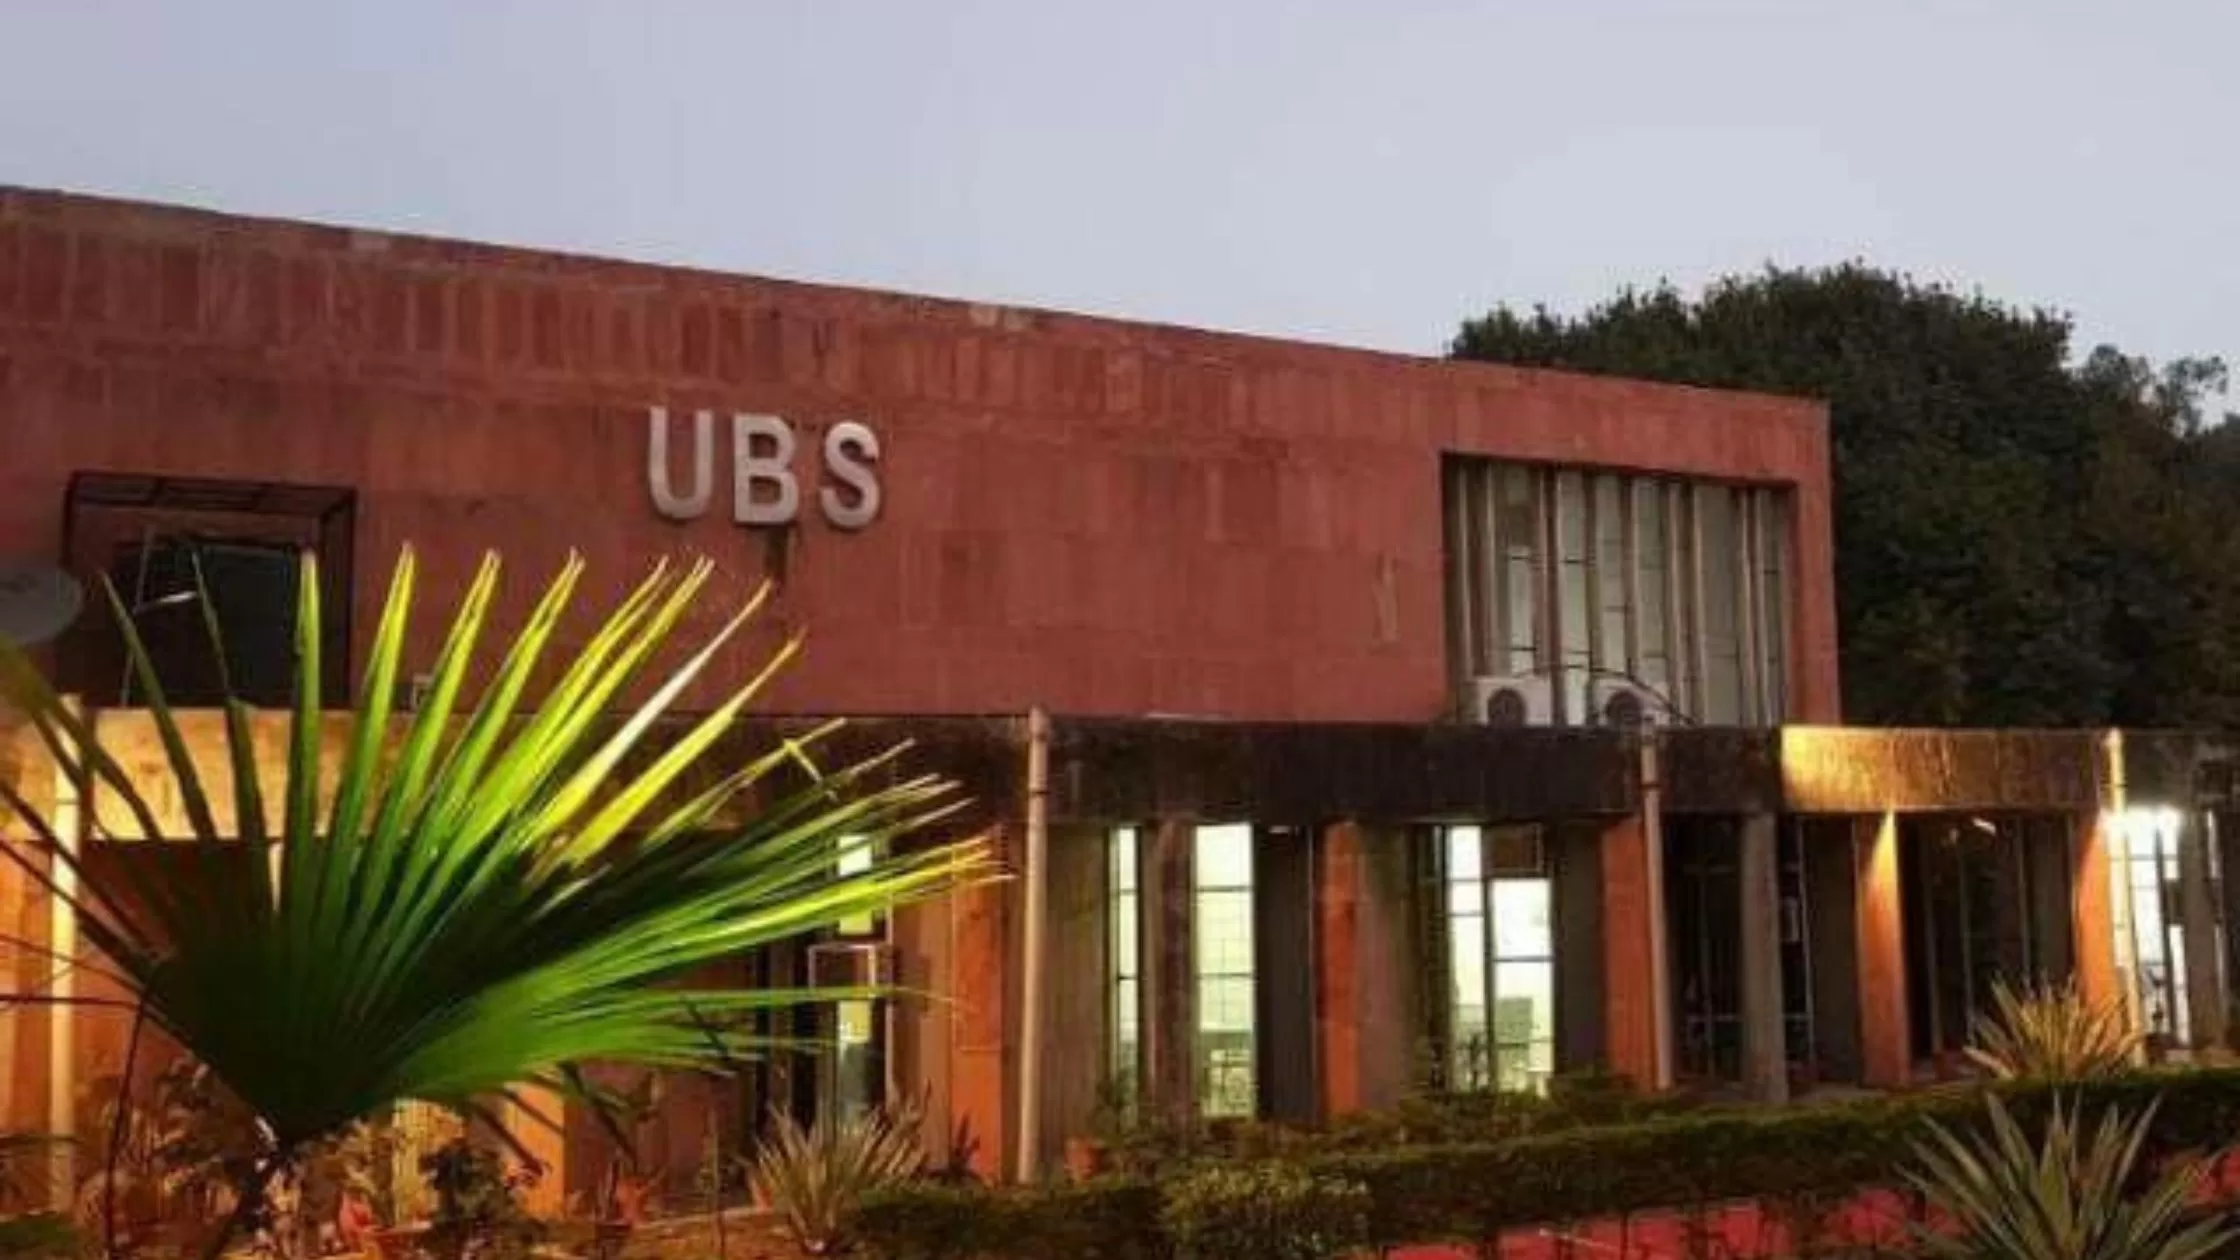 An outside view of University Business School building in Chandigarh.